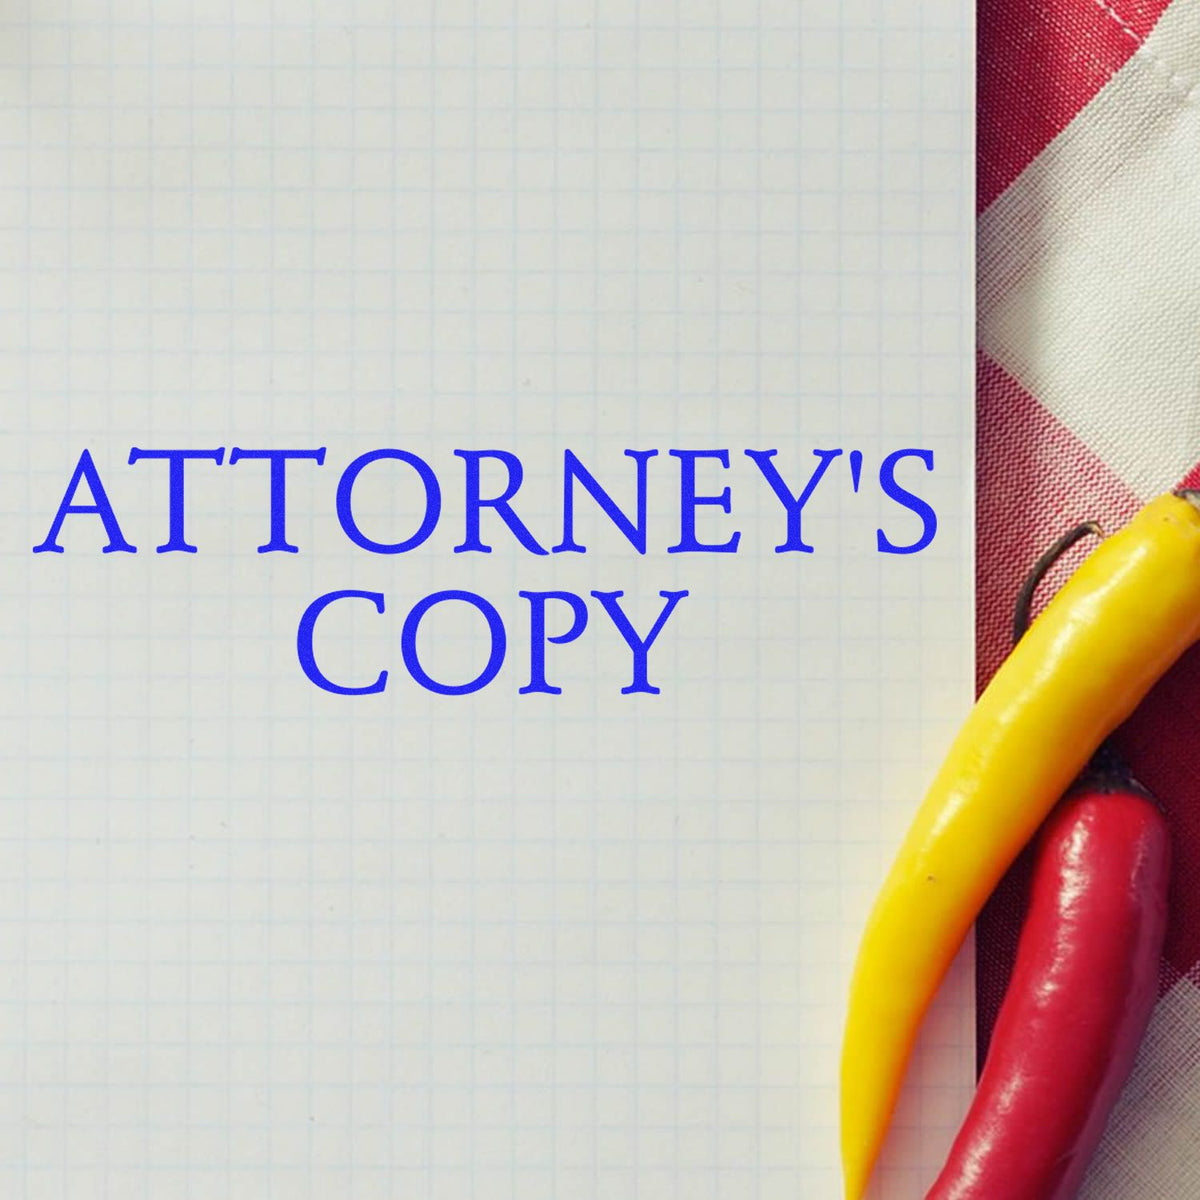 Large Attorneys Copy Rubber Stamp In Use Photo